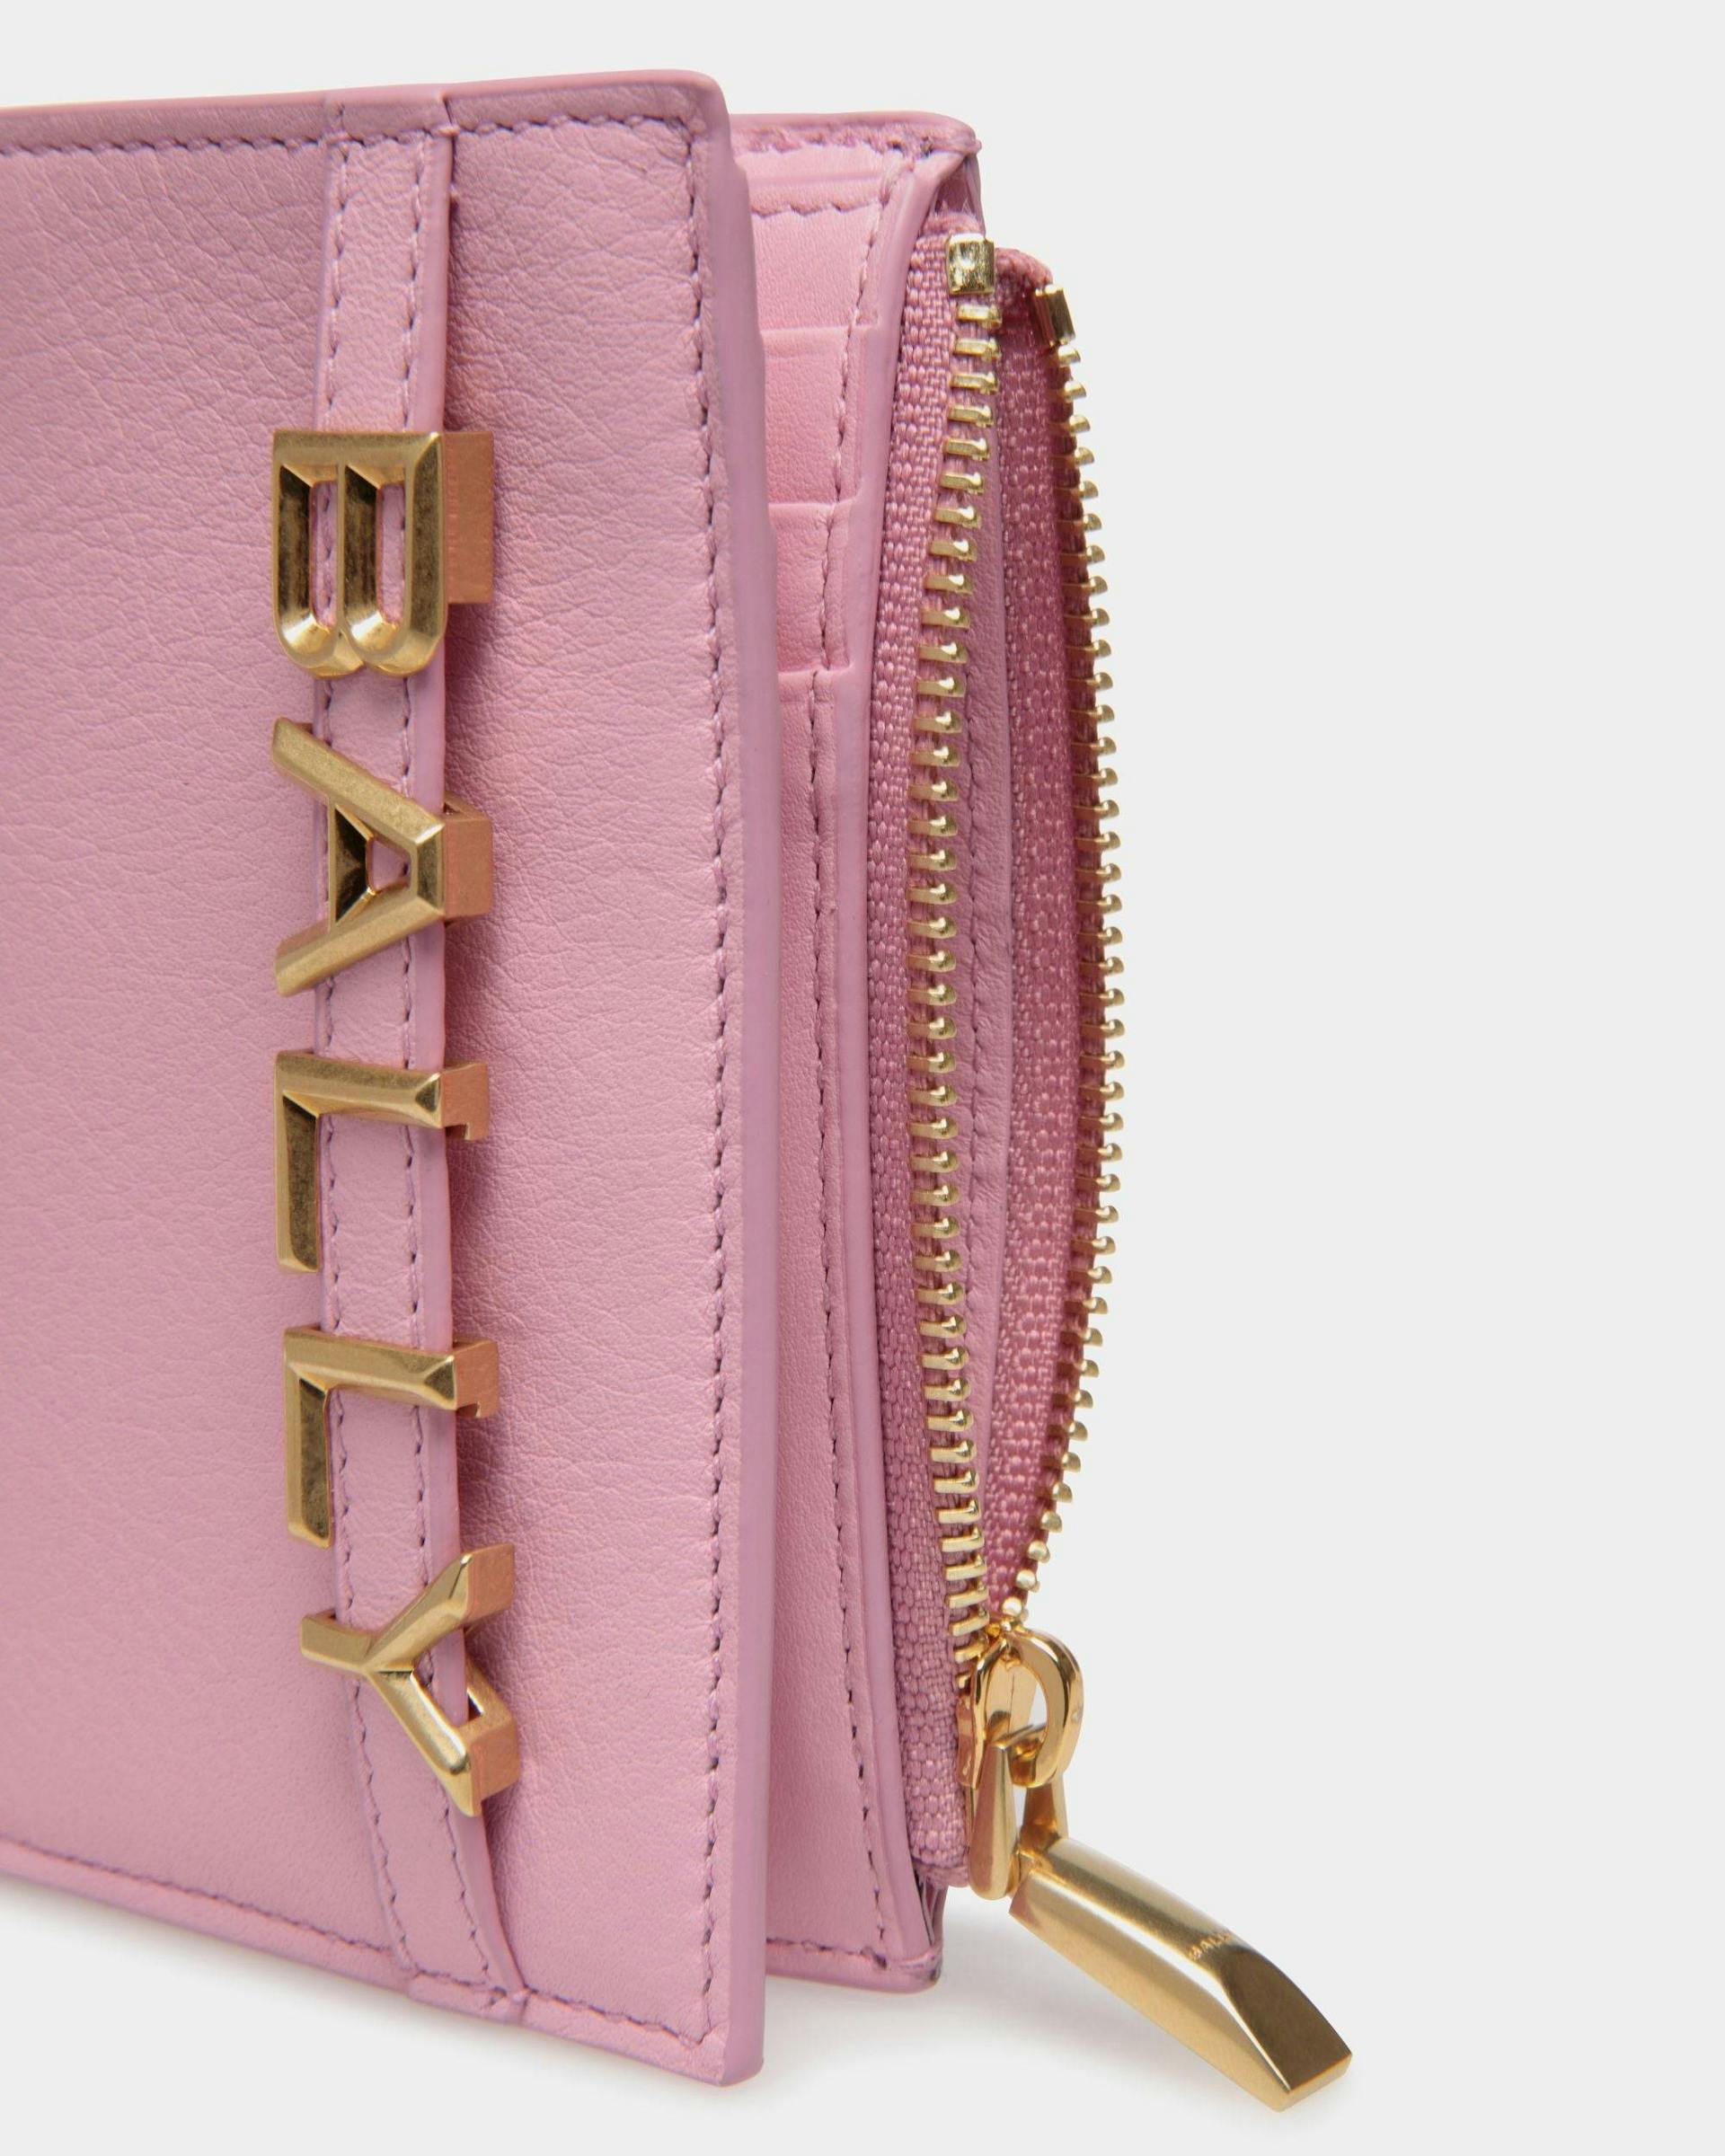 Women's Bally Spell Wallet in Pink Leather | Bally | Still Life Detail